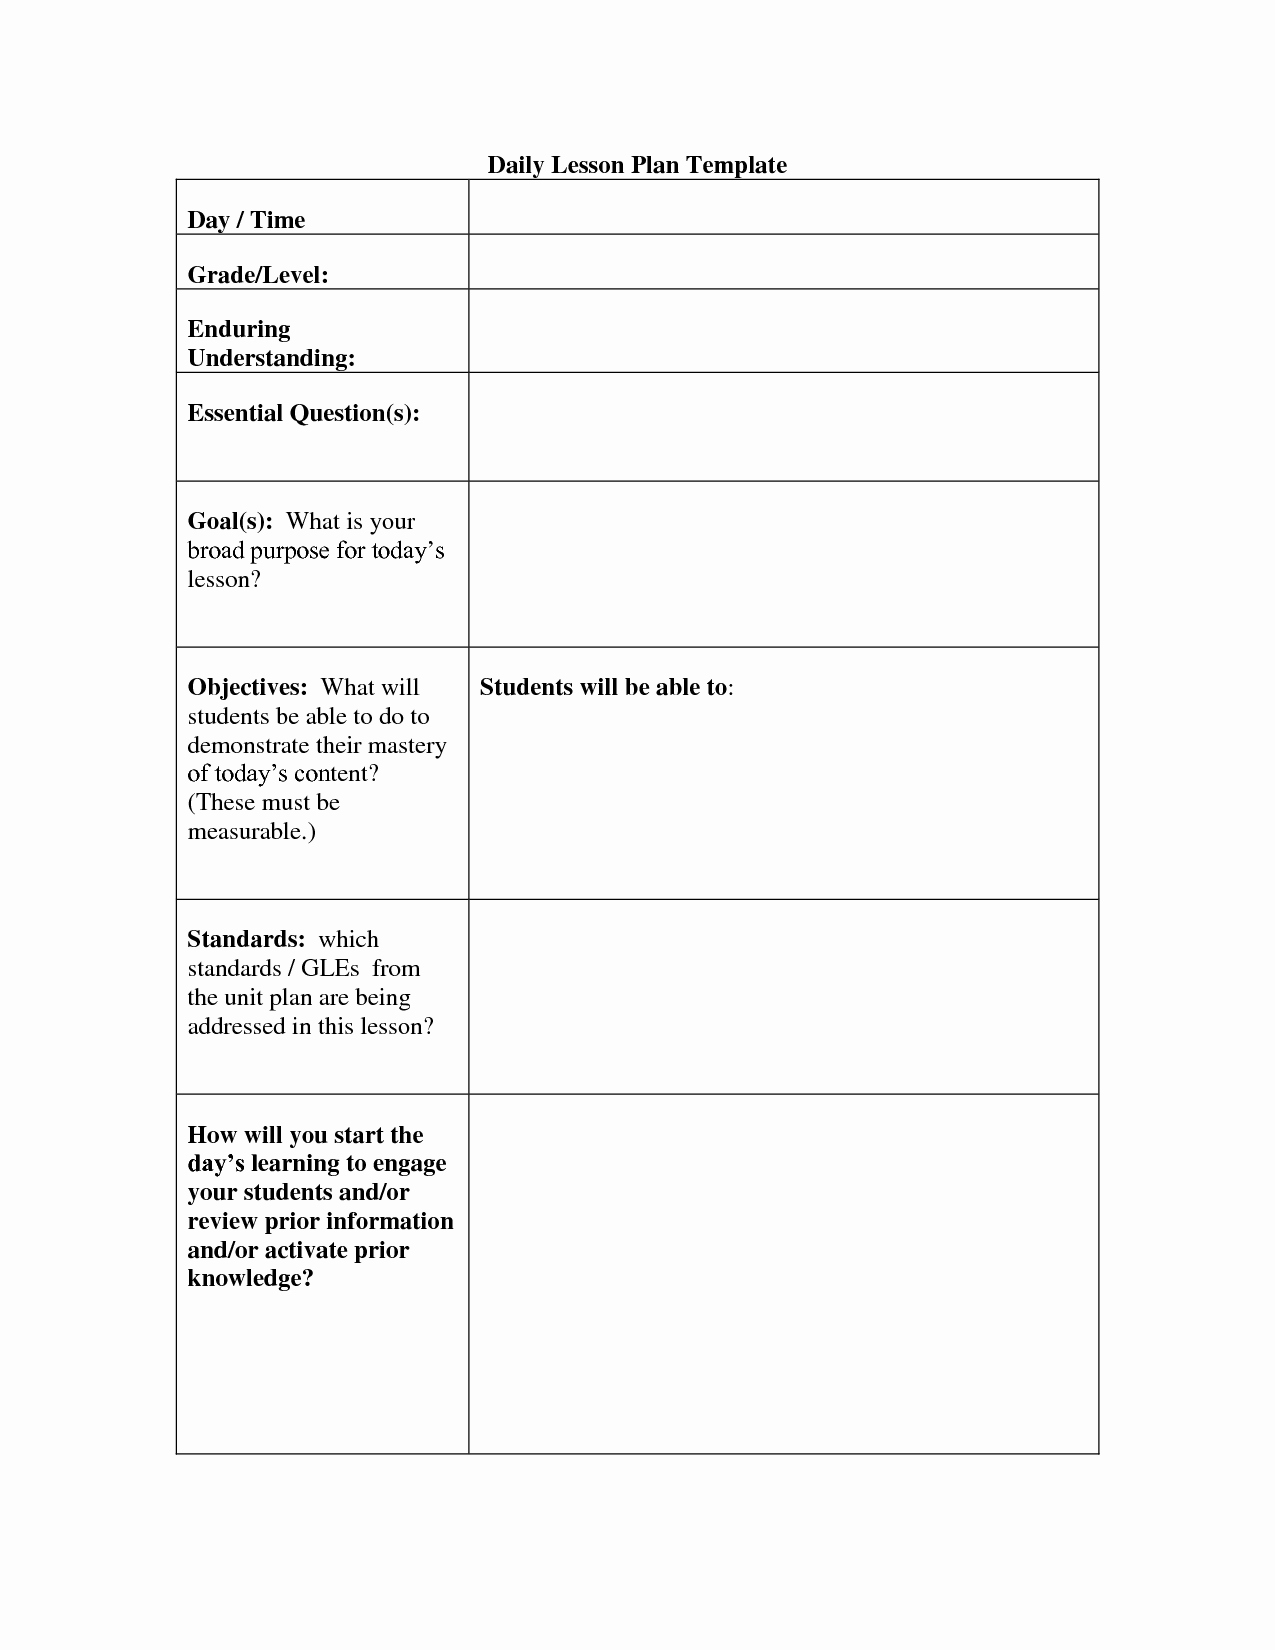 Example Lesson Plan Template New Daily Lesson Plan Template Beepmunk